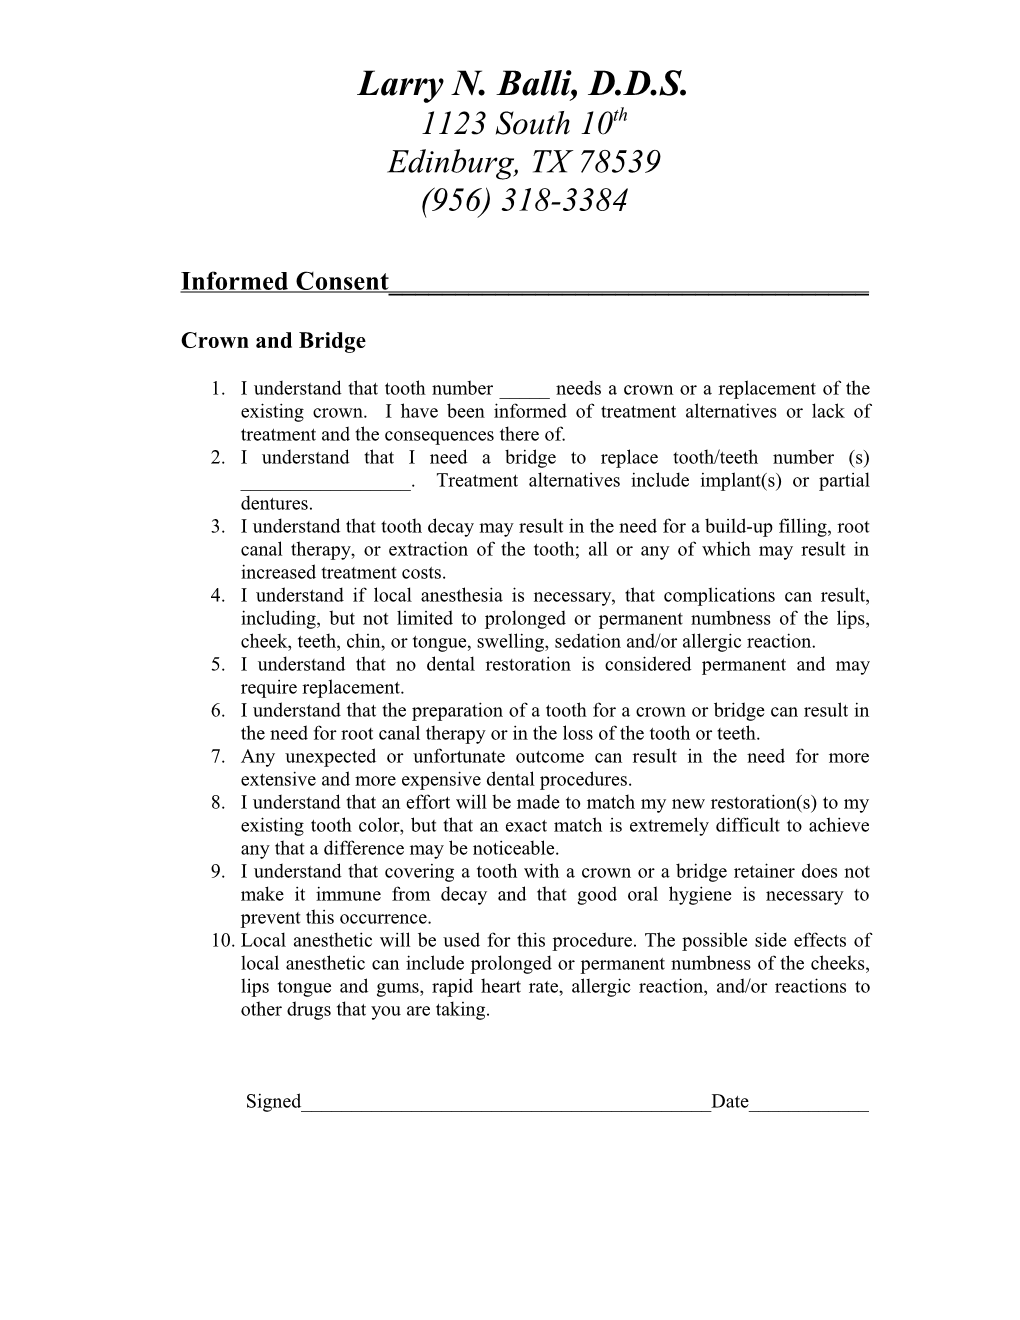 Crown and Bridge Consent Form